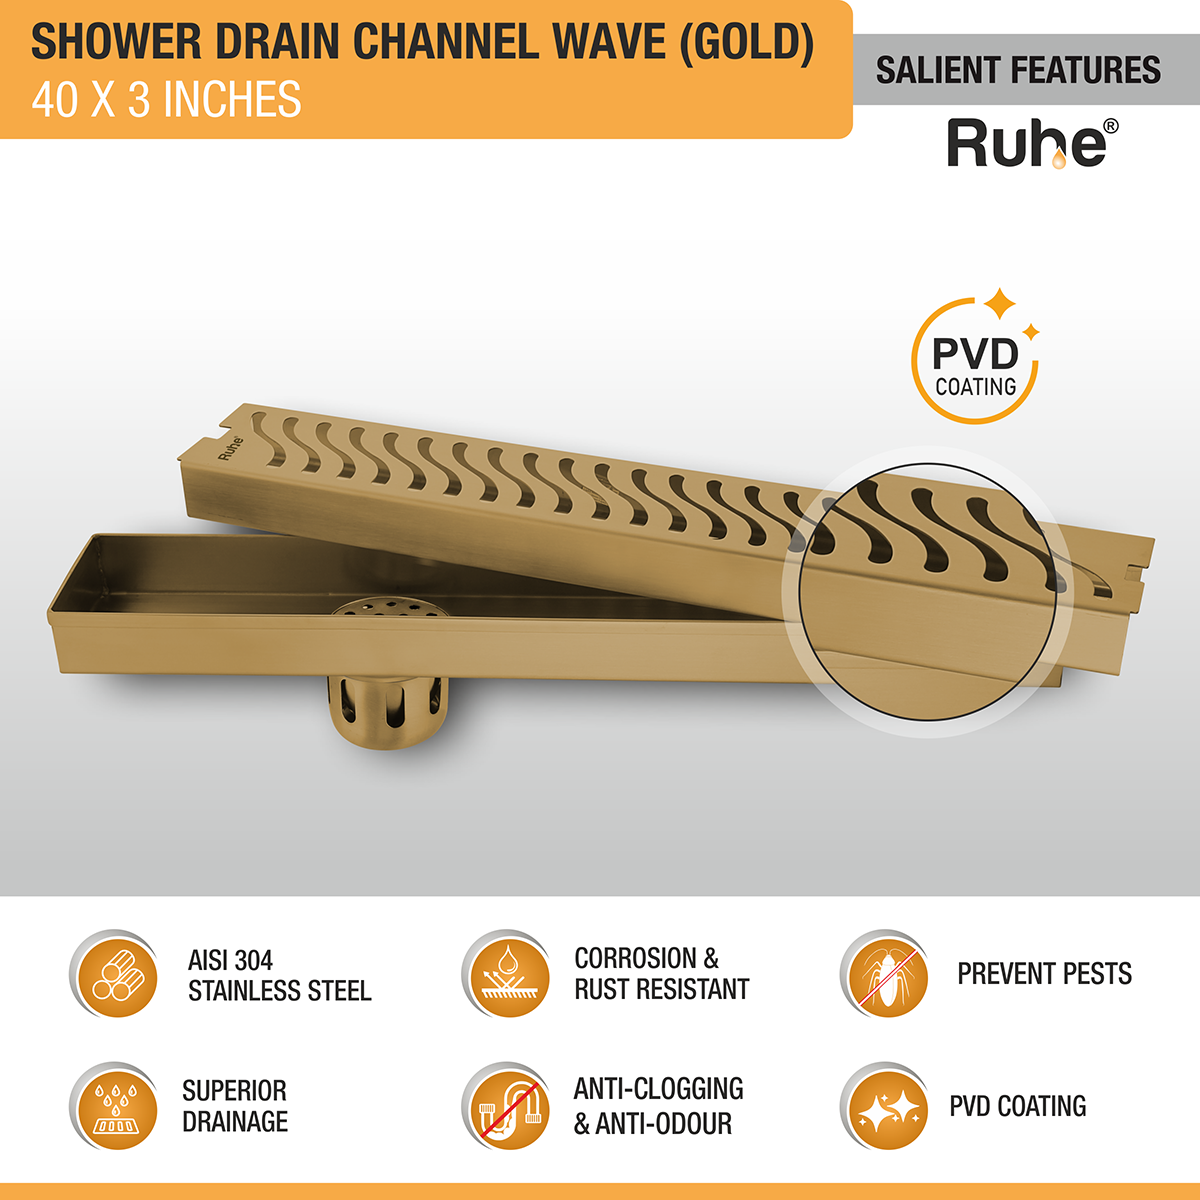 Wave Shower Drain Channel (40 x 3 Inches) YELLOW GOLD features